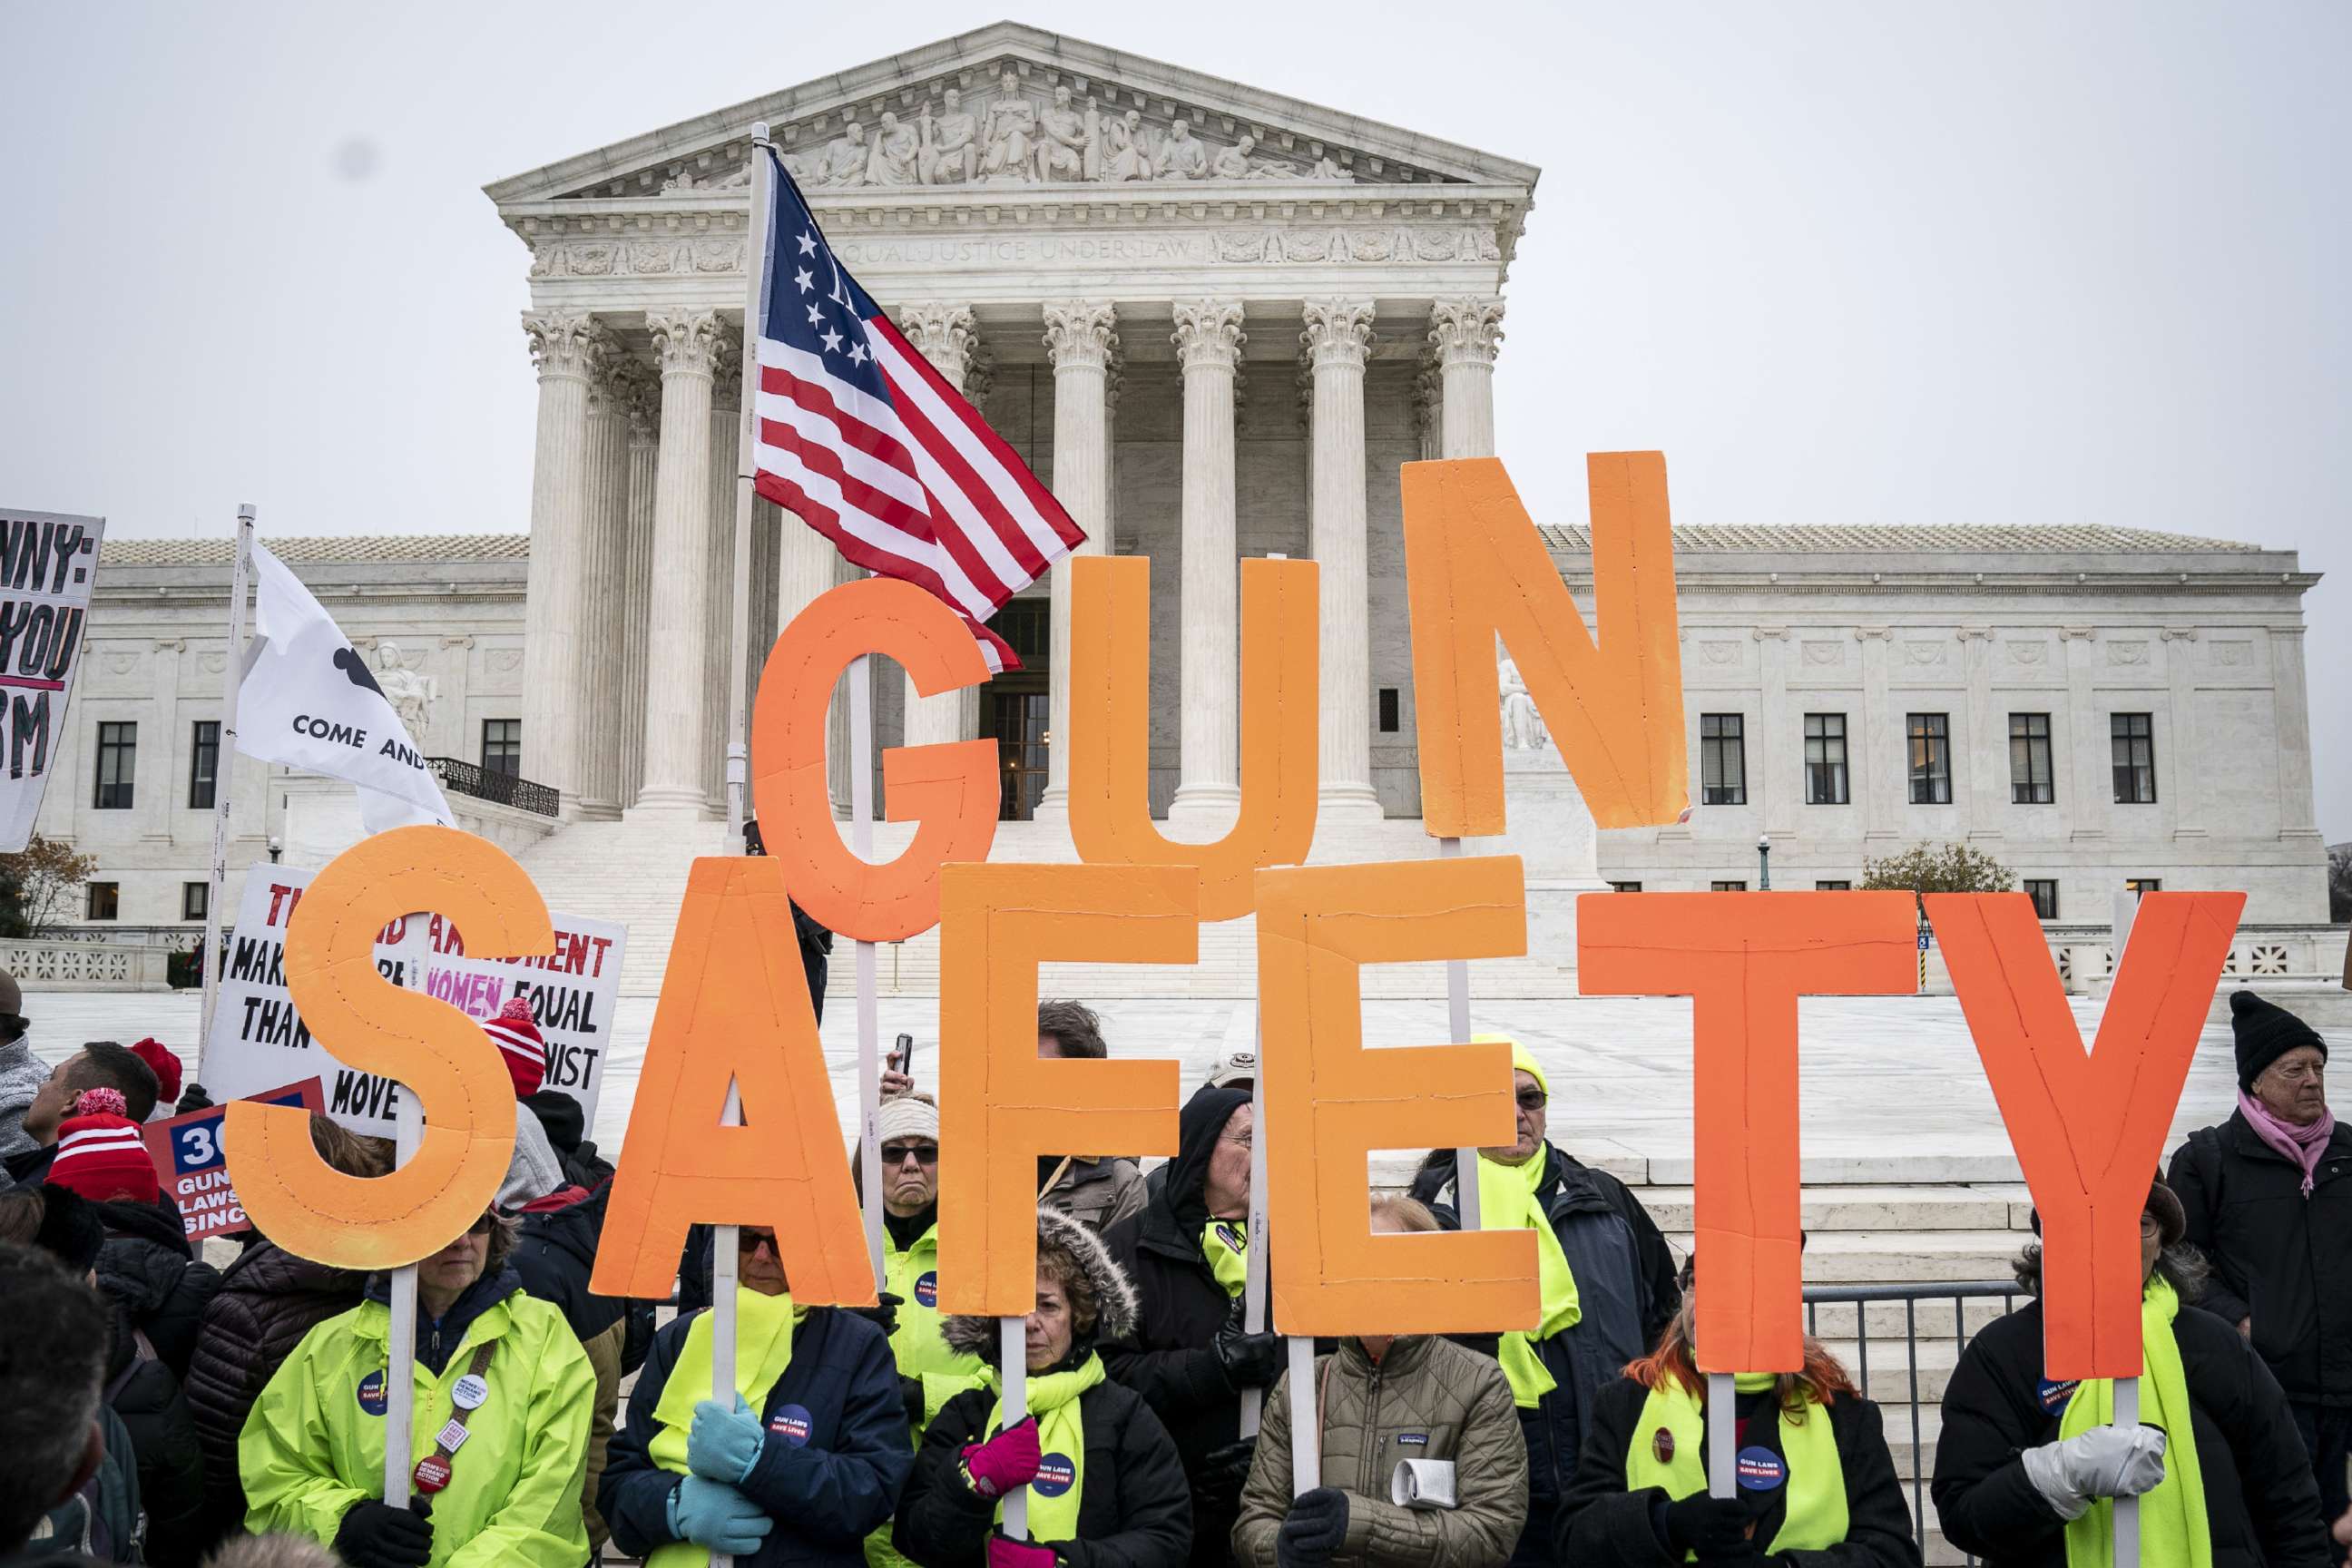 PHOTO: Gun safety advocates rally in front of the U.S. Supreme Court during oral arguments in the Second Amendment case NY State Rifle & Pistol v. City of New York, NY on Dec. 2, 2019 in Washington, D.C.